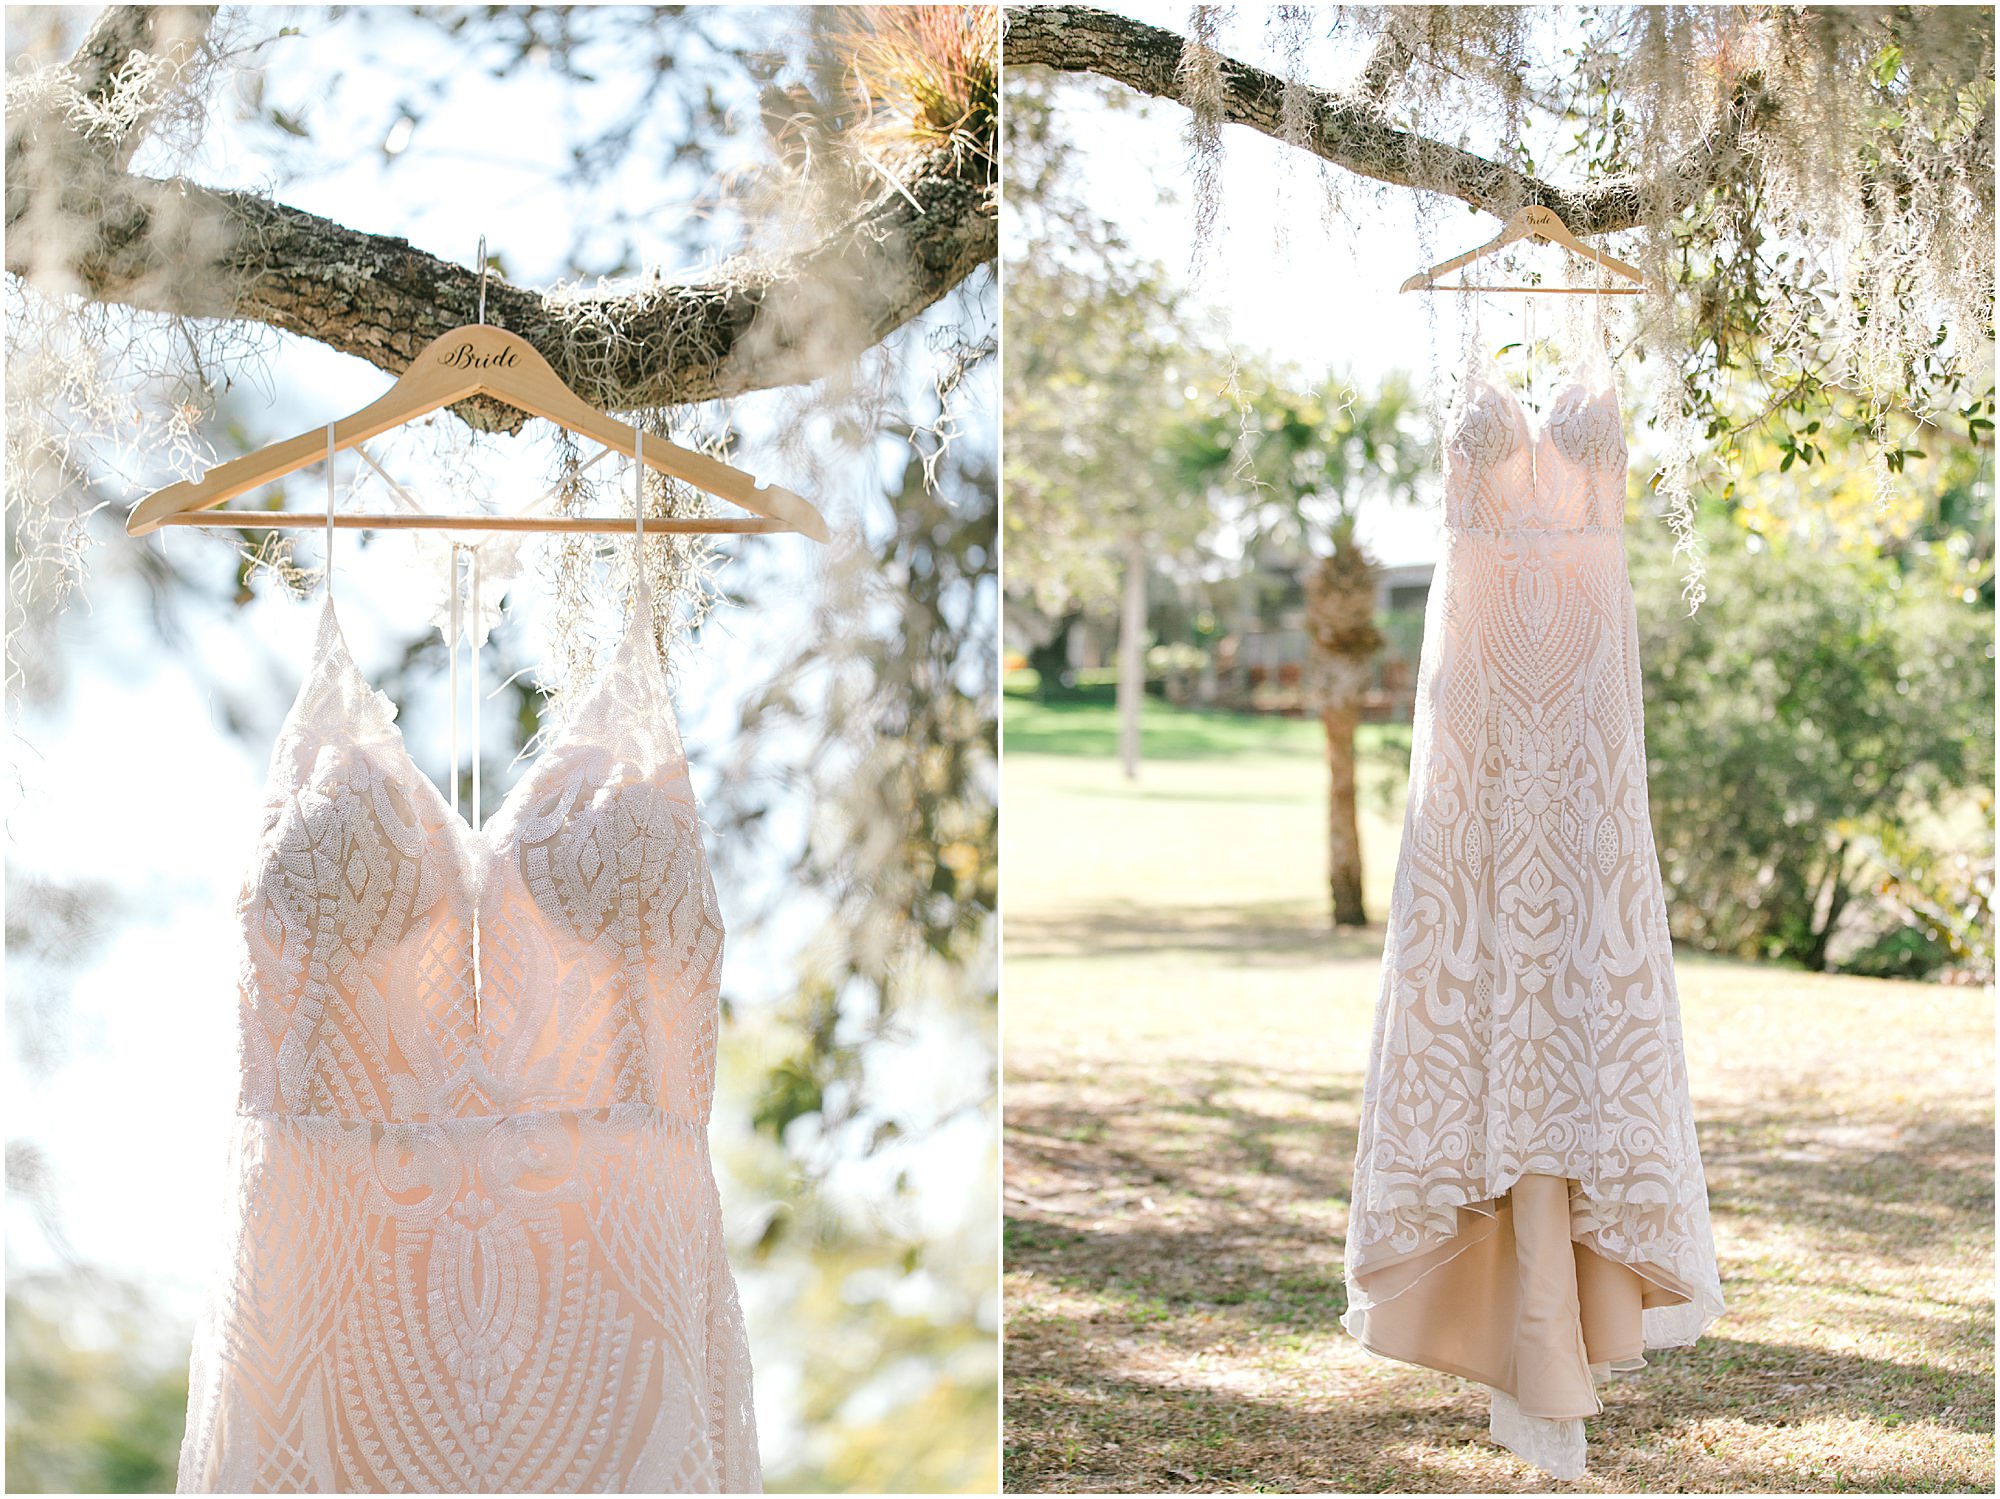 Dusty rose and burgundy wedding dress hanging from an old oak tree